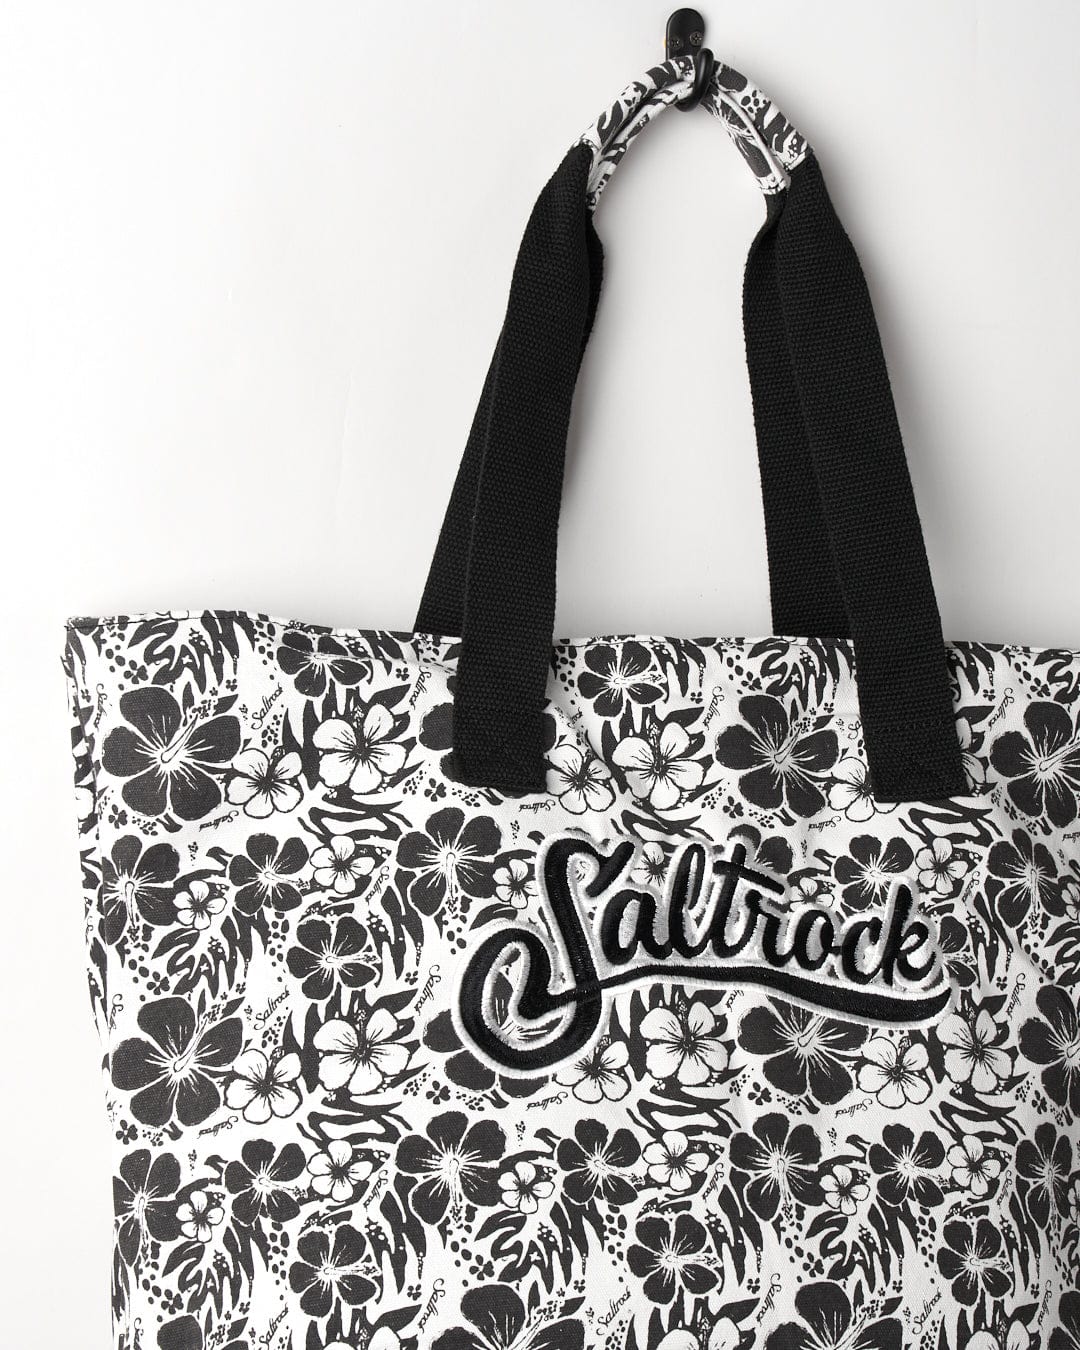 Floral print cotton tote bag with black straps and "Saltrock" branding
will become
Hibiscus Shopper Bag - Black by Saltrock.